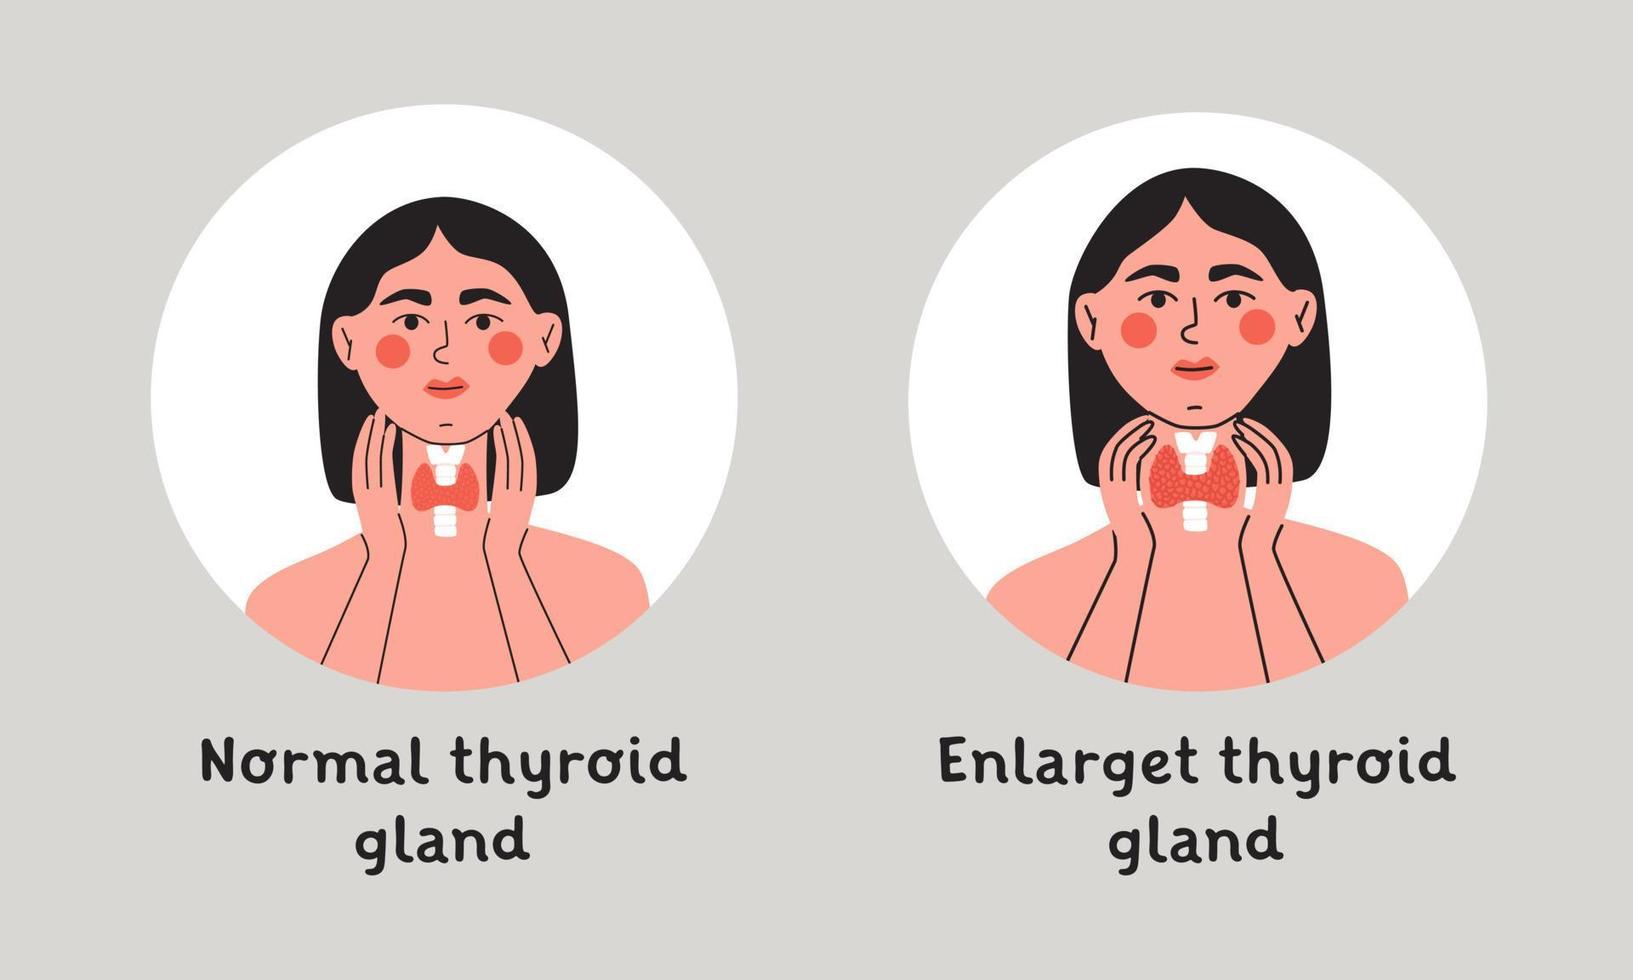 Normal and enlarget thyroid gland. Woman showing thyroid gland on her neck. Endocrinology system symbol, organ responsible for hormone production. vector